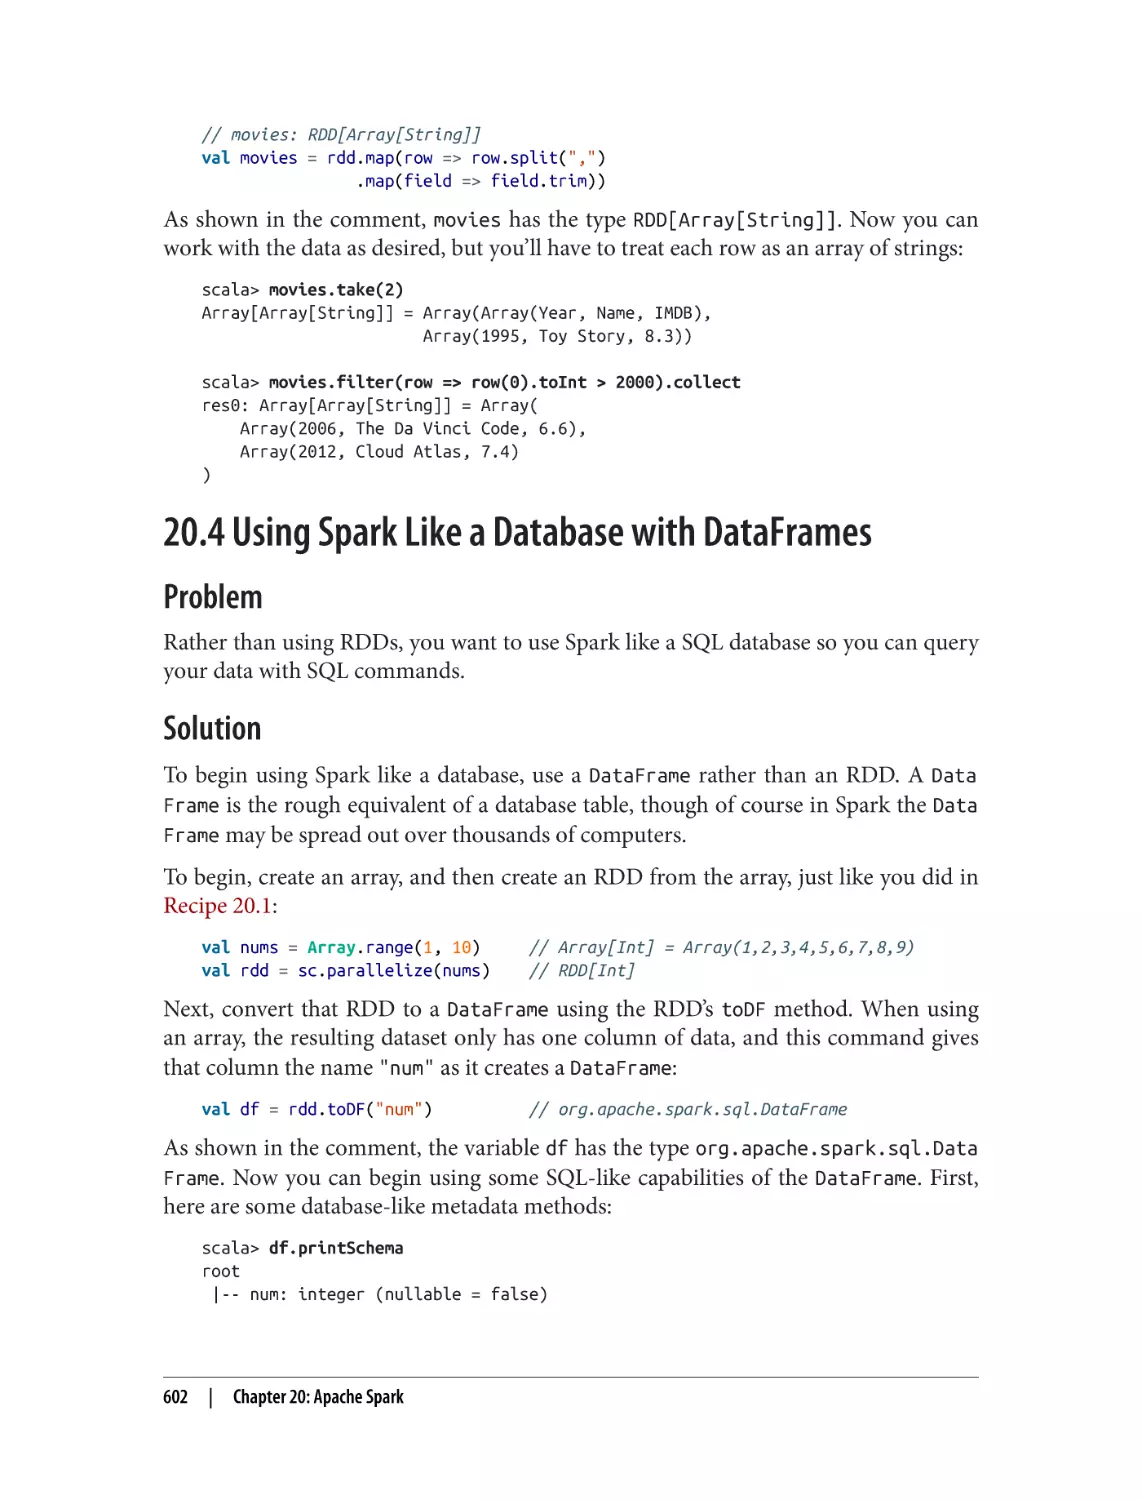 20.4 Using Spark Like a Database with DataFrames
Problem
Solution